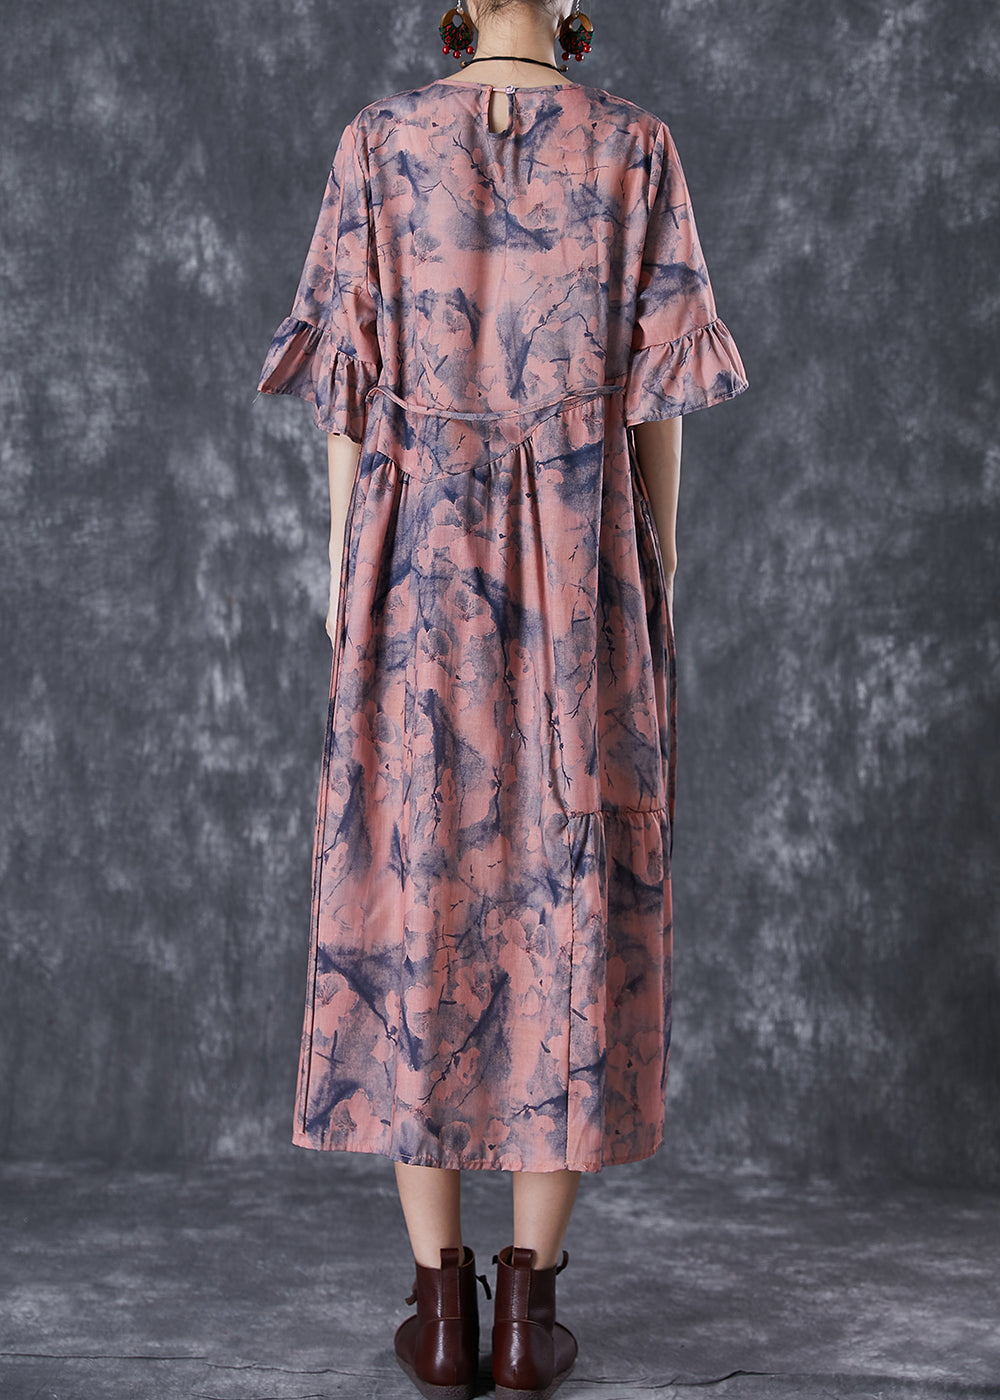 Pink Tie Dye Cotton Holiday Dress Wrinkled Butterfly Sleeve LY7104 - fabuloryshop